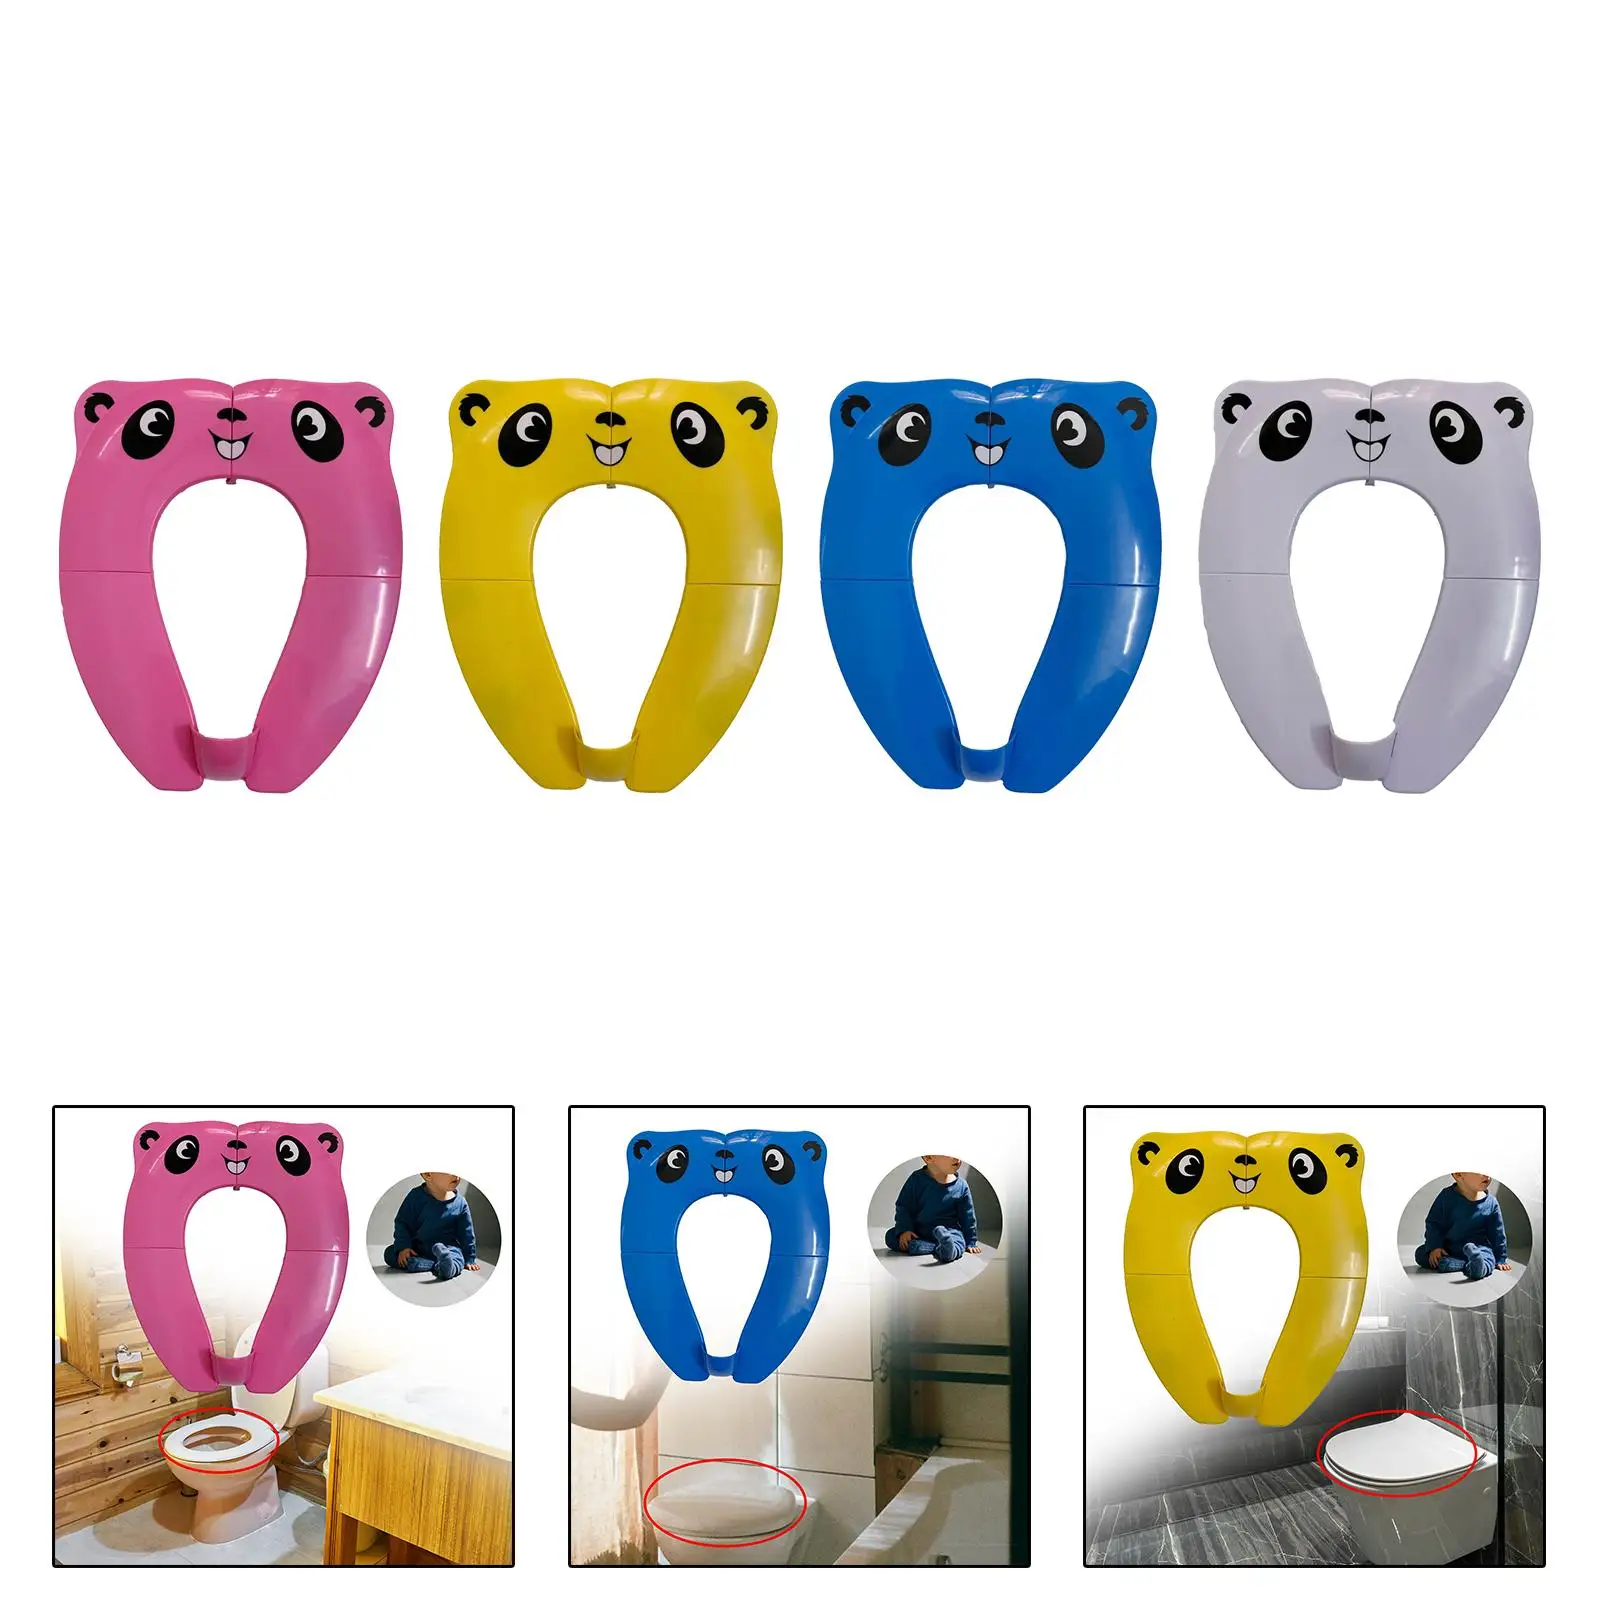 Foldable Travel Potty Seat Toilet Pad with Splash Guard Toilet Training Potty Seat Cover Non Slip for Girls Toddlers